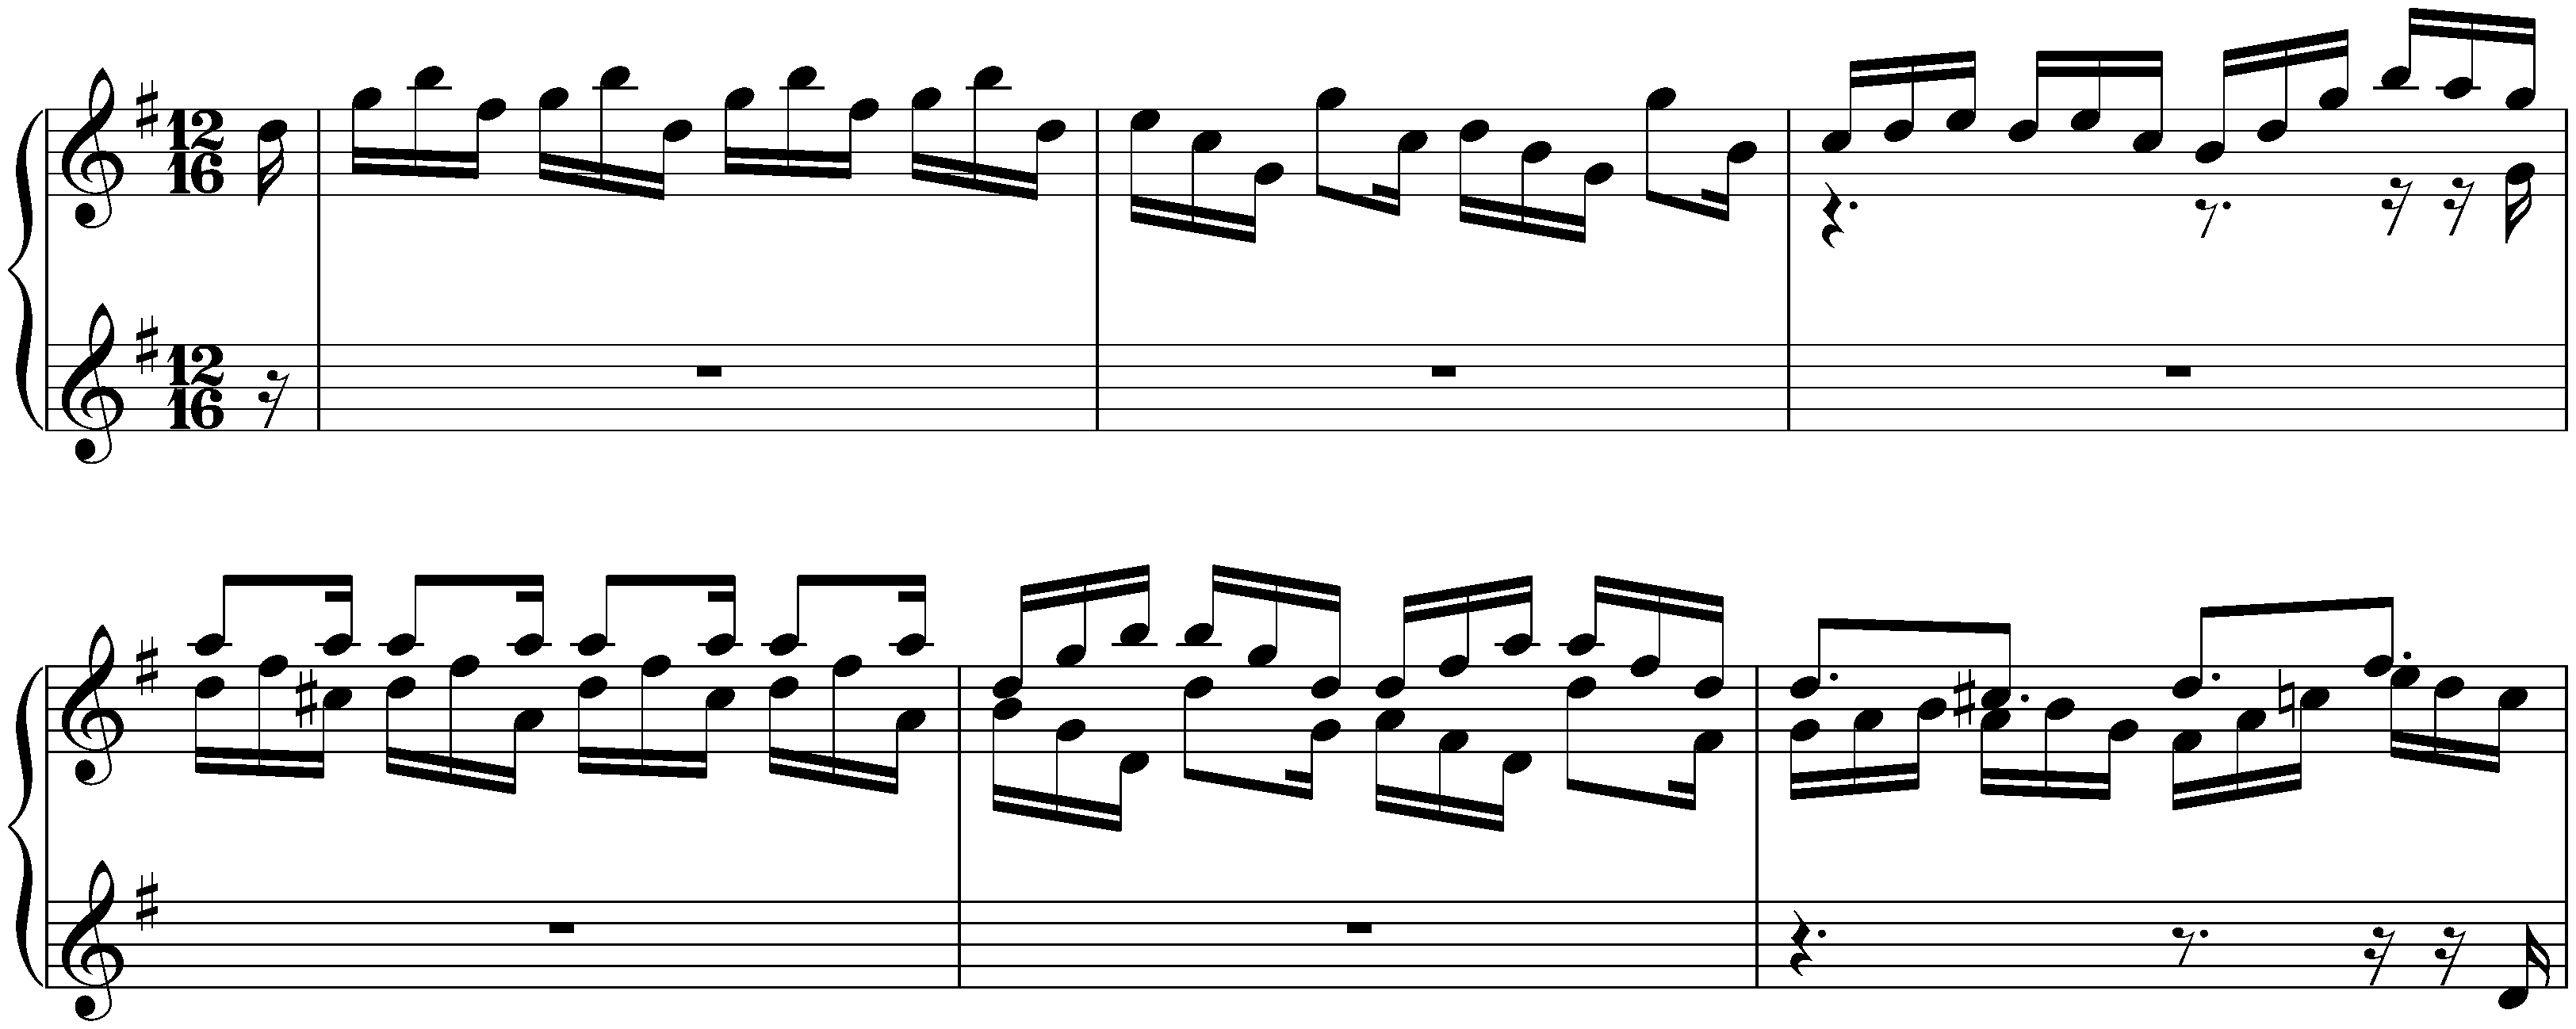 French Suite no. 5 in G major, BWV 816; 7. Gigue